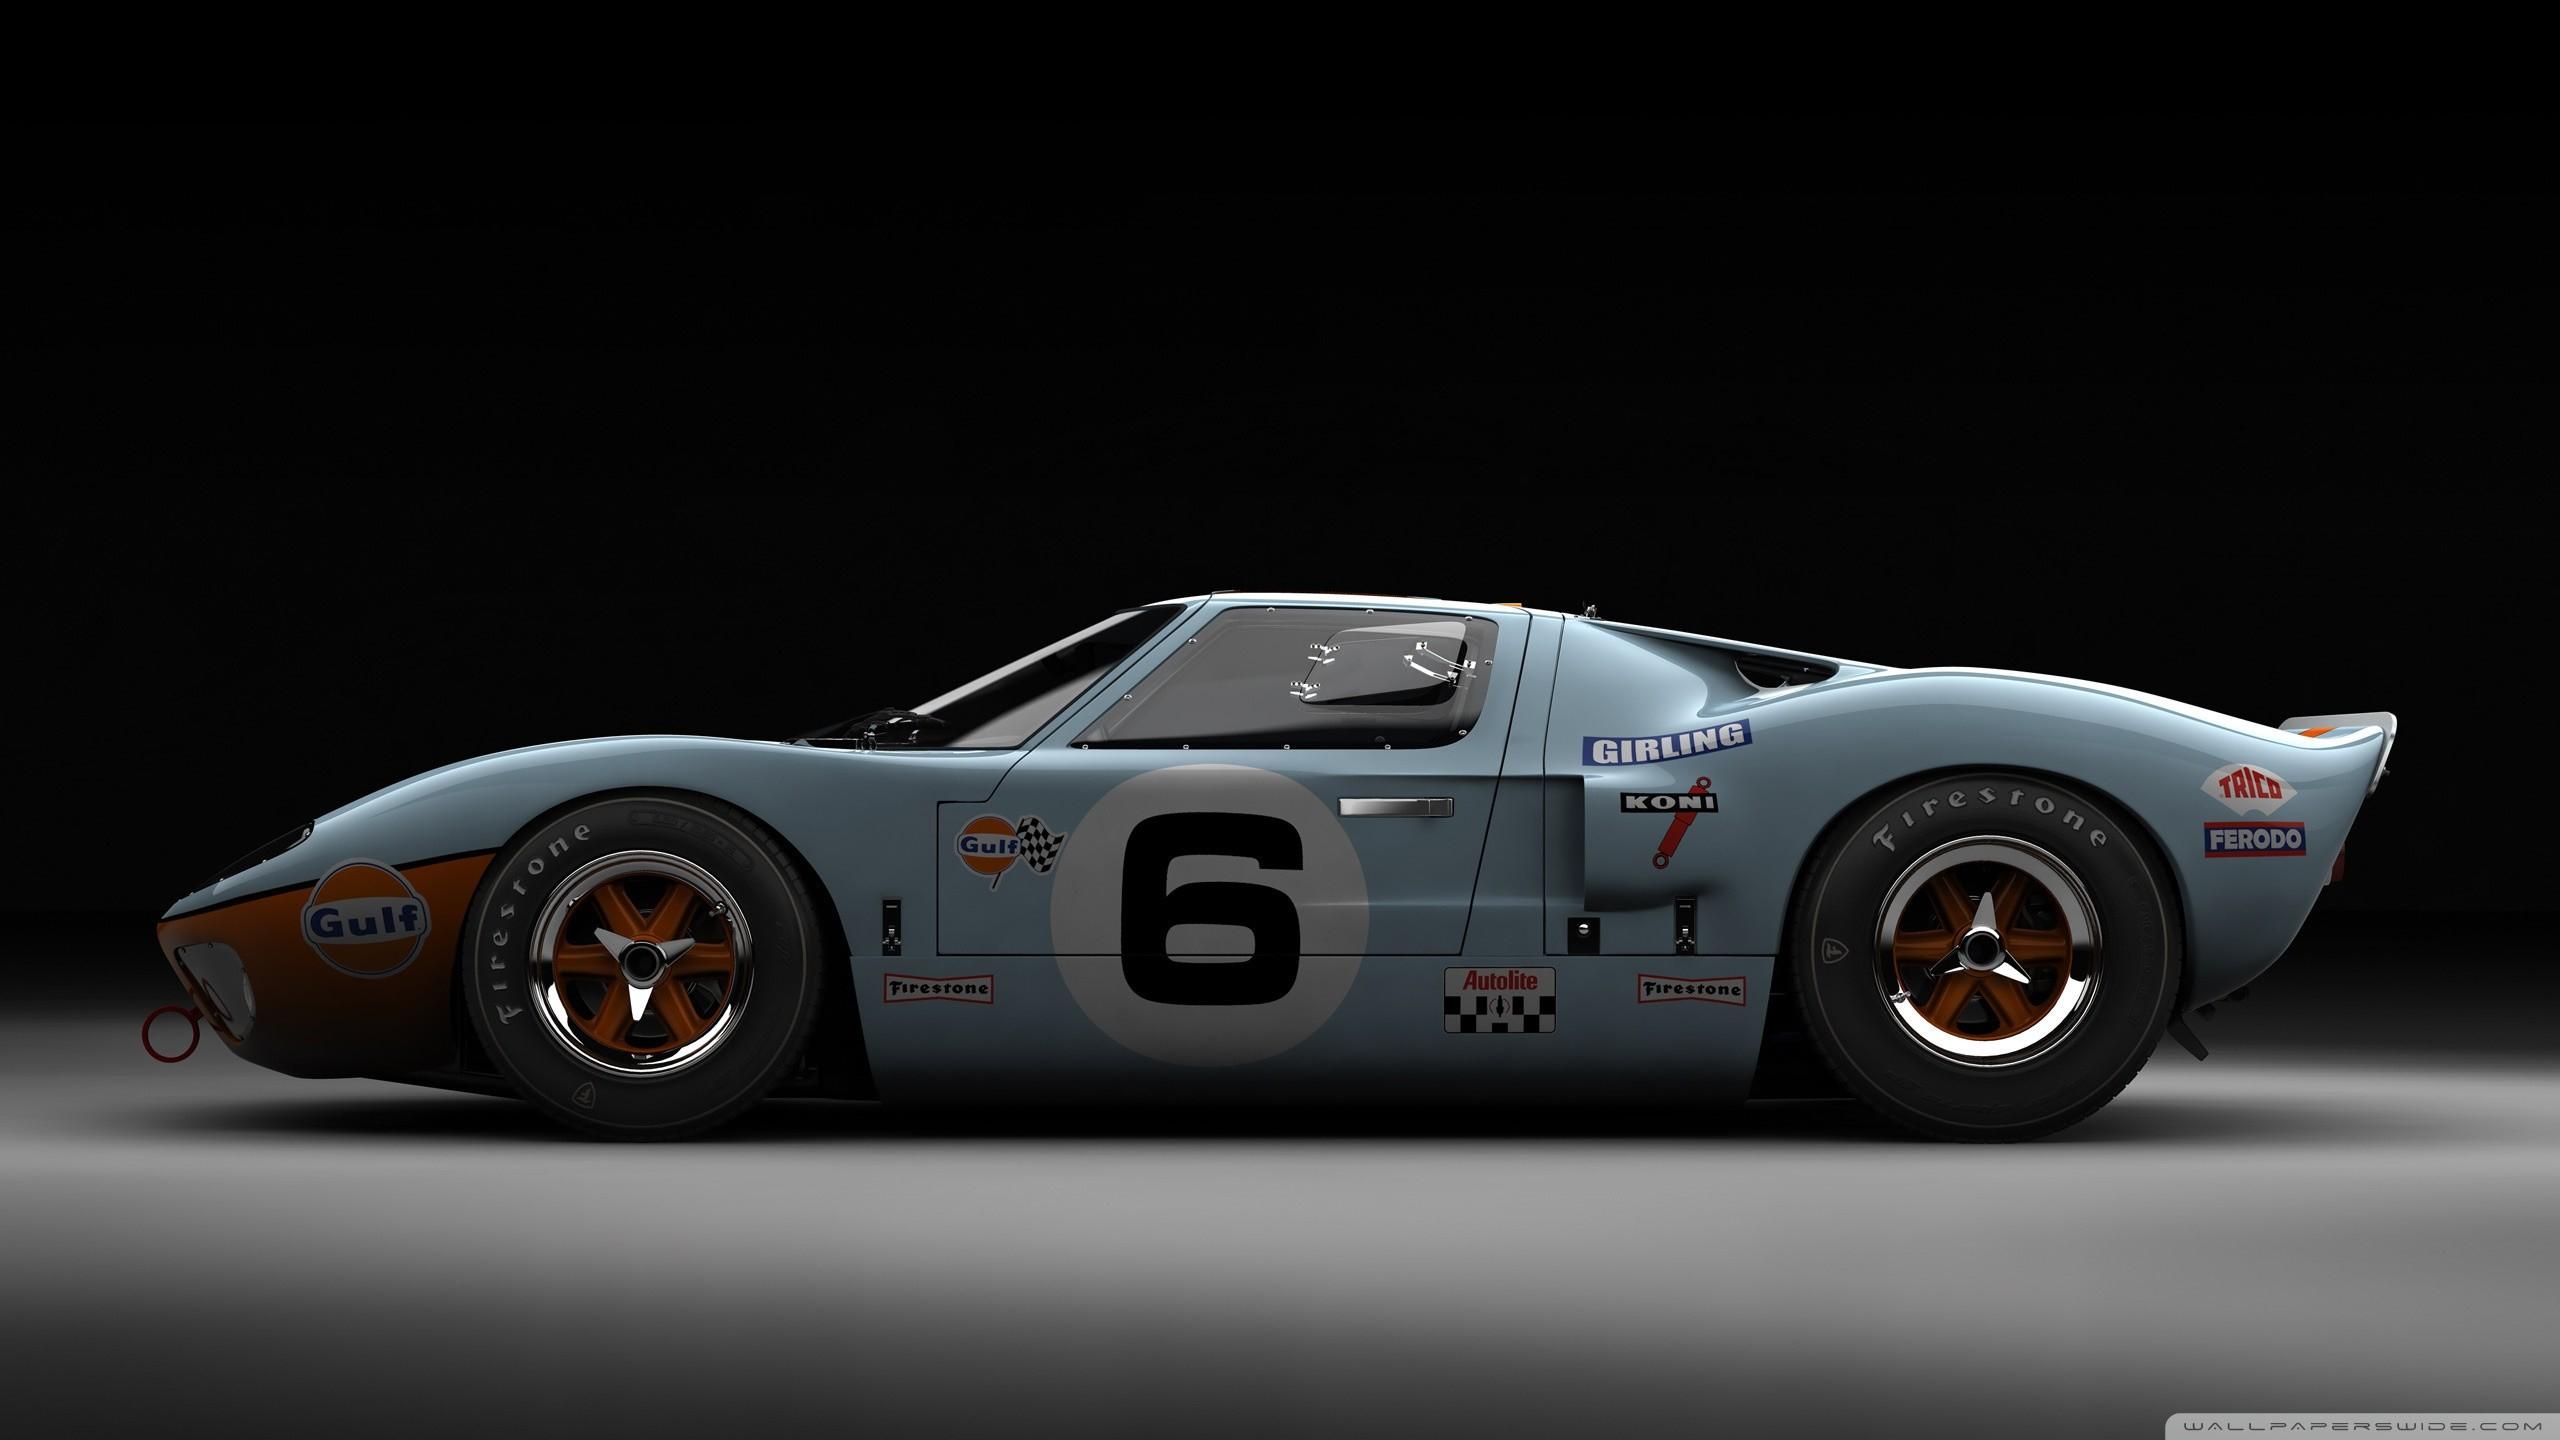 Ford Gt40 Wallpaper (the best image in 2018)